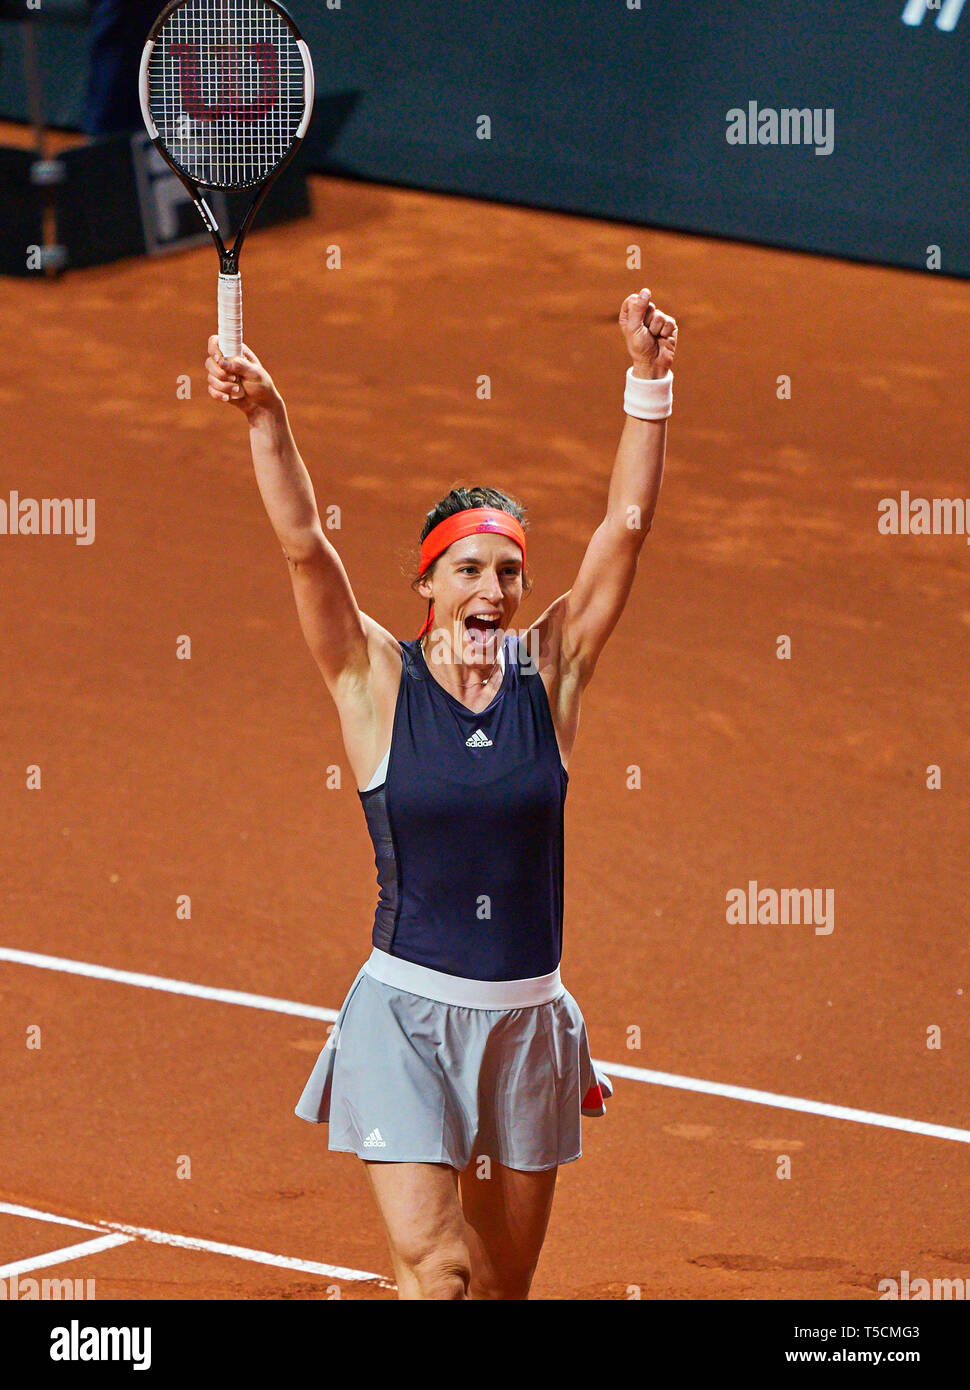 Stuttgart, Germany. 23rd Apr, 2019. Andrea PETKOVIC (GER) celebrate after  her victory in her match against Sara SORRIBES TORMO (ESP). Petkovic won  6-3, 6-4 at the Tennis Grand Prix Porsche Ladies WTA